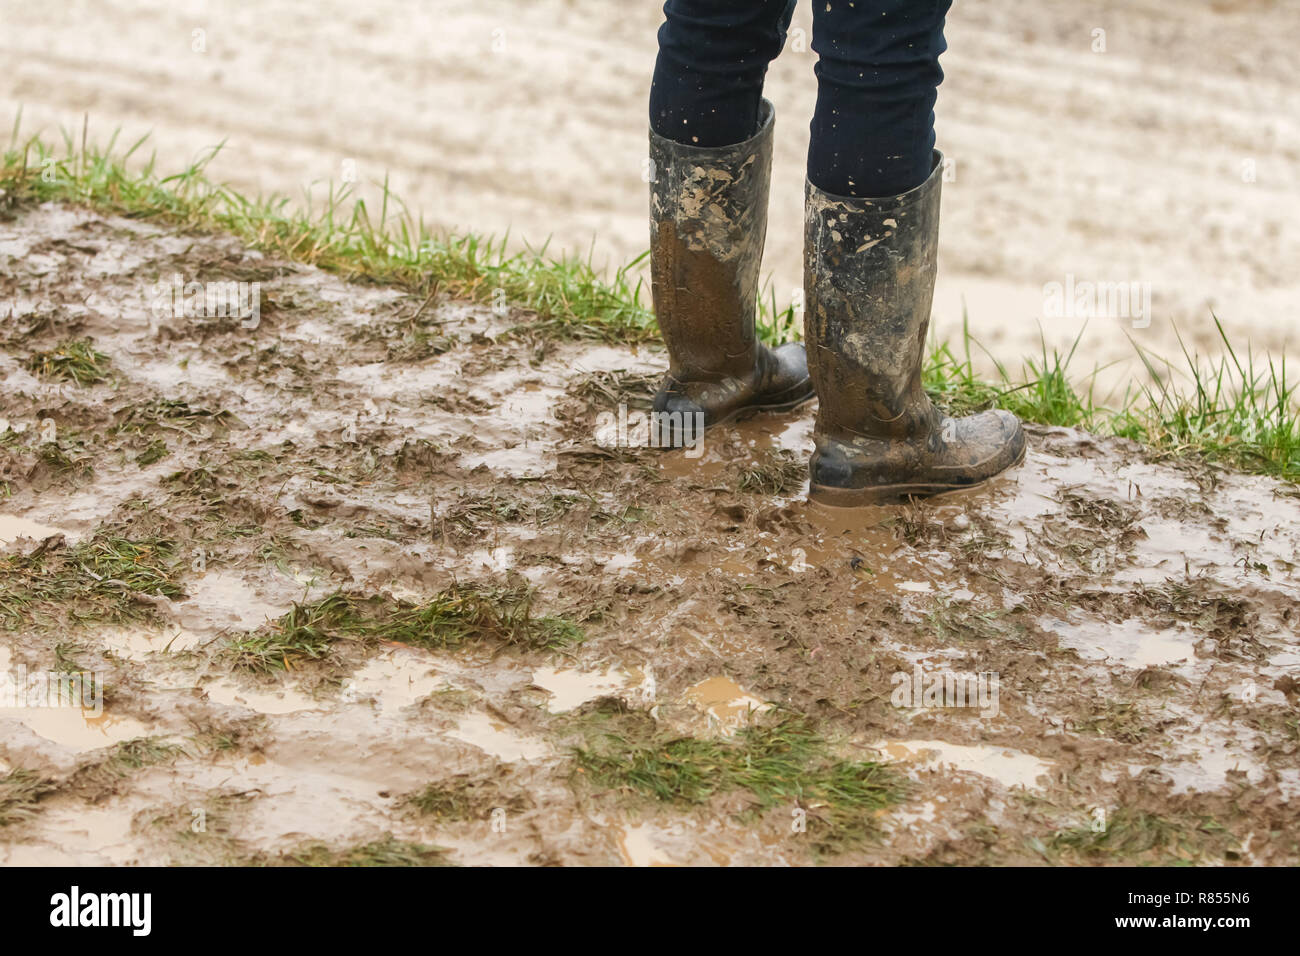 A person in rubber boots standing in the mud Stock Photo - Alamy